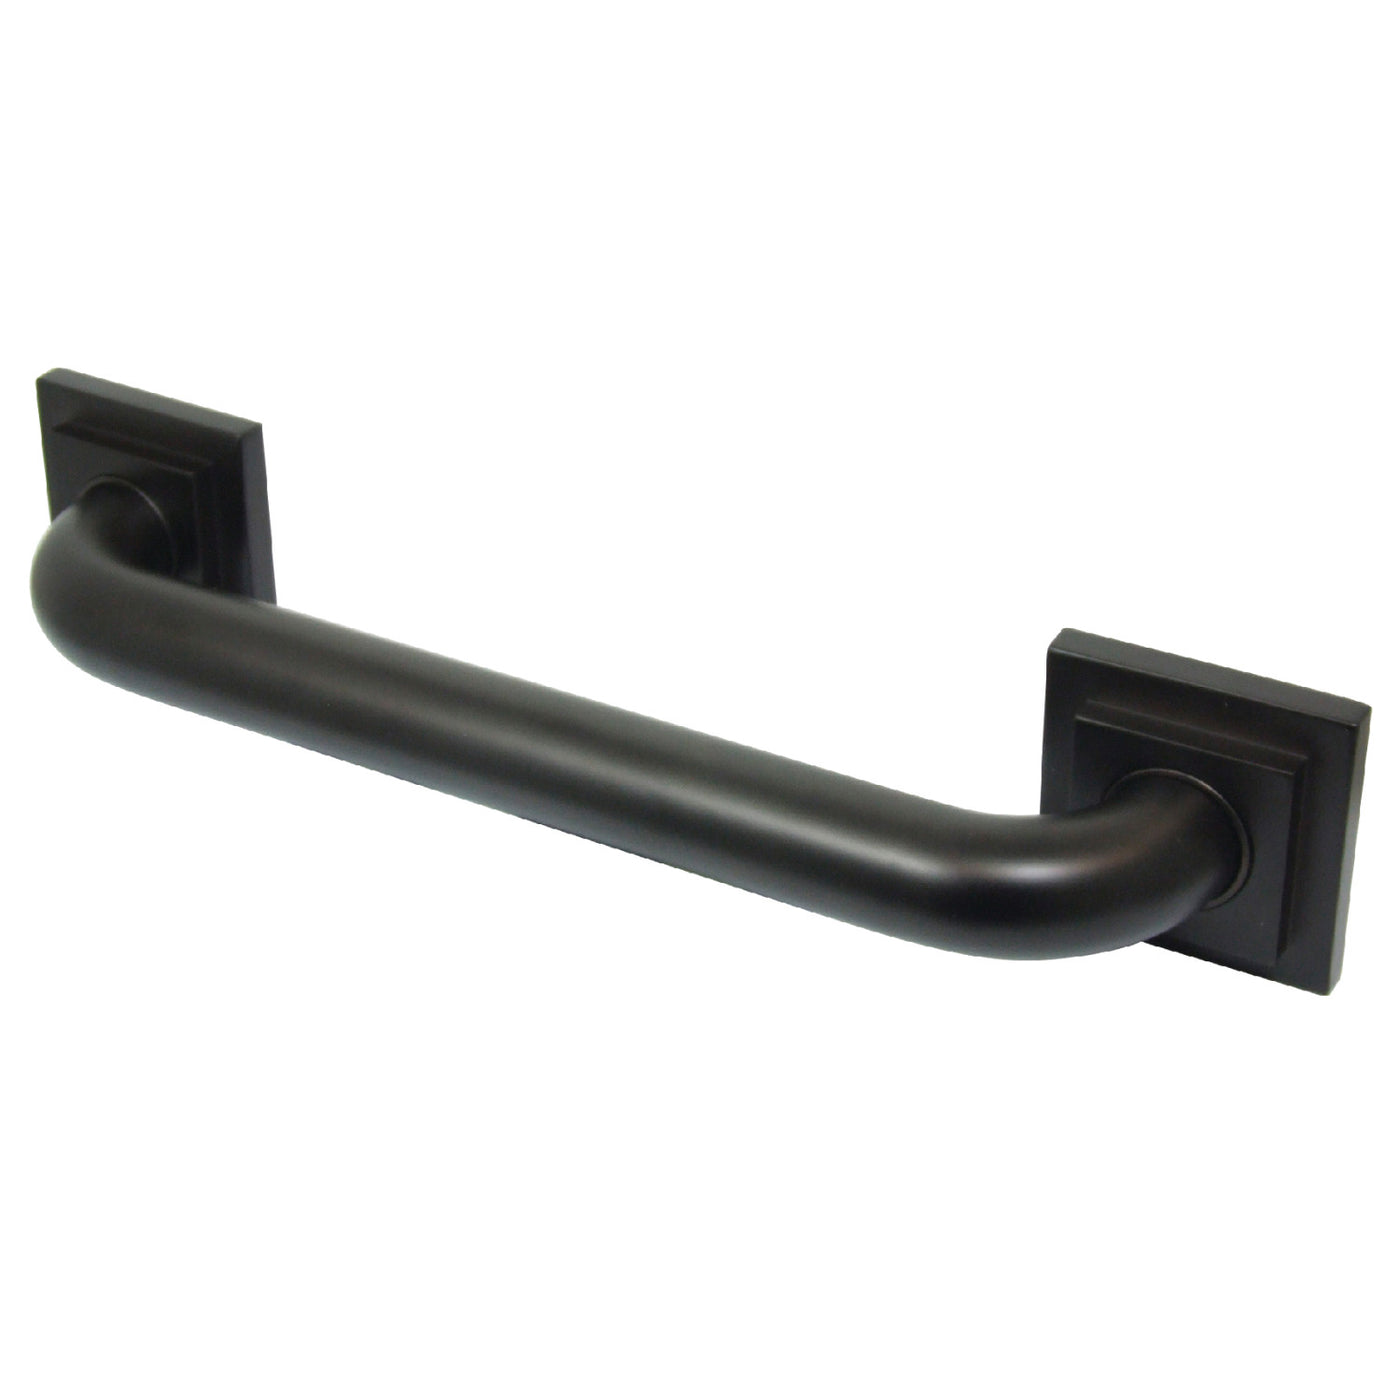 Elements of Design EDR614185 18-Inch x 1-1/4-Inch O.D Grab Bar, Oil Rubbed Bronze